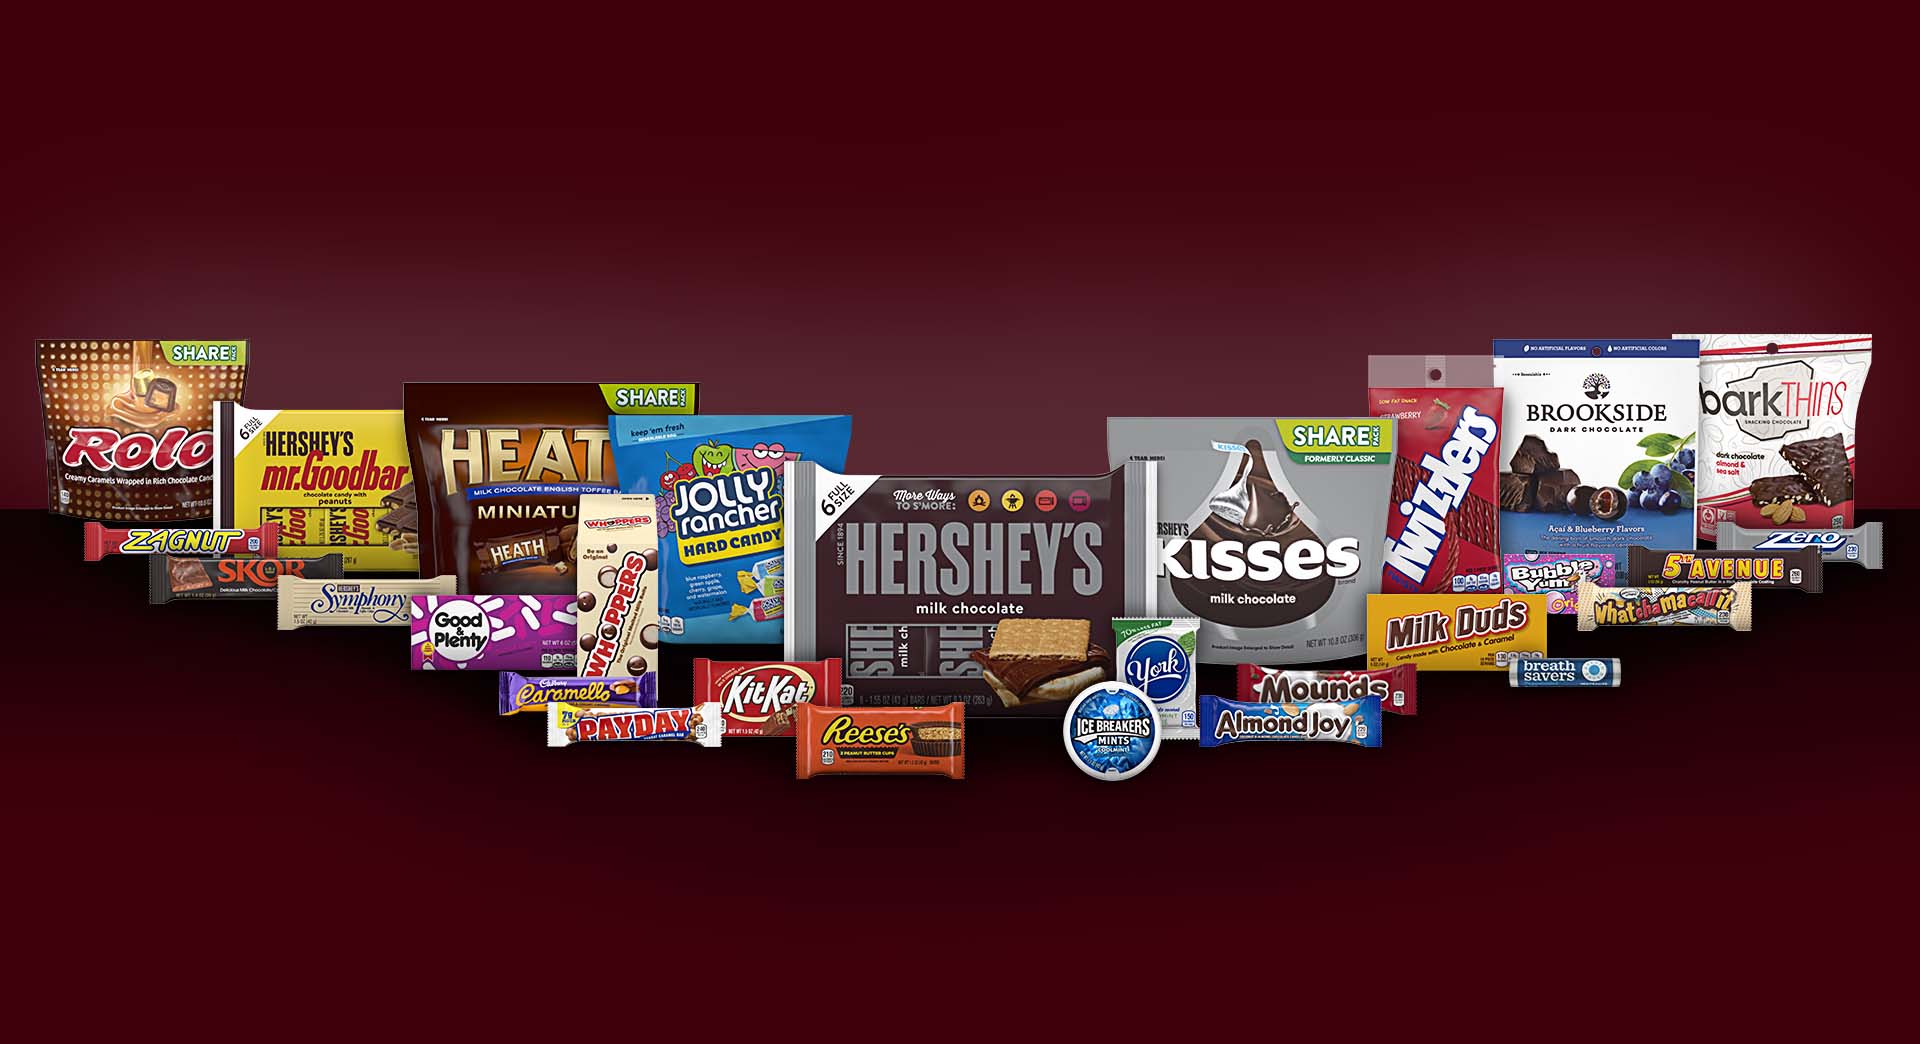 HERSHEY'S Chocolate and Candy | Our Popular Brands & Retro Candy